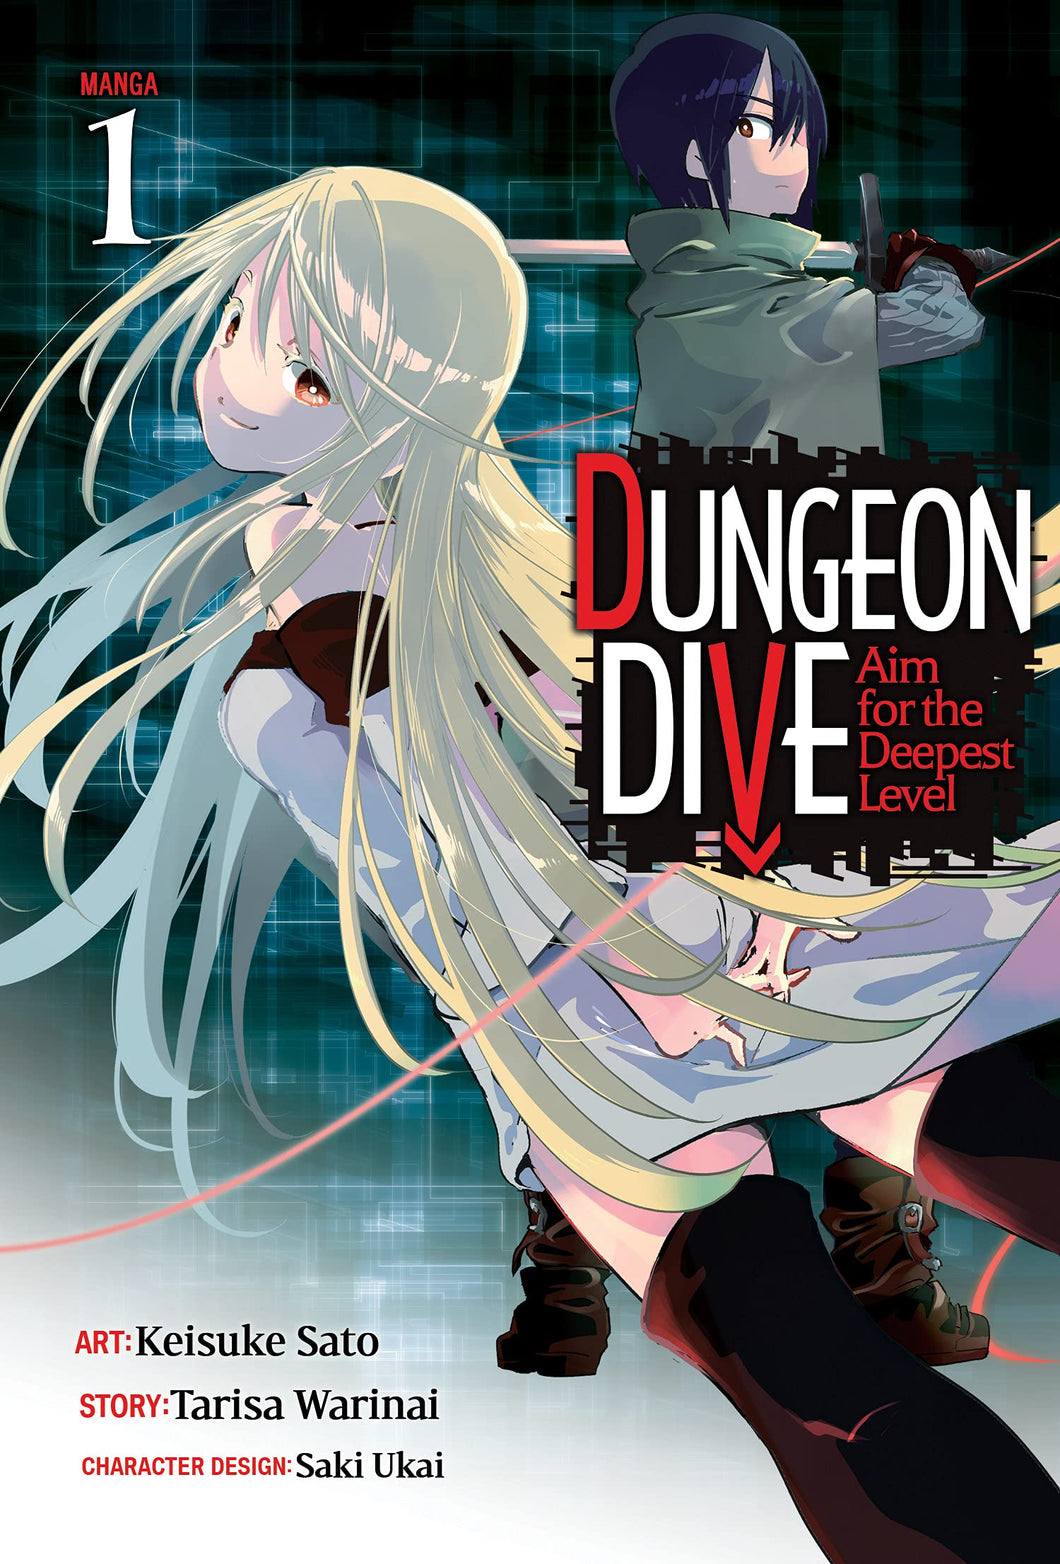 Dungeon Dive Aim For The Deepest Level Manga Volume 1